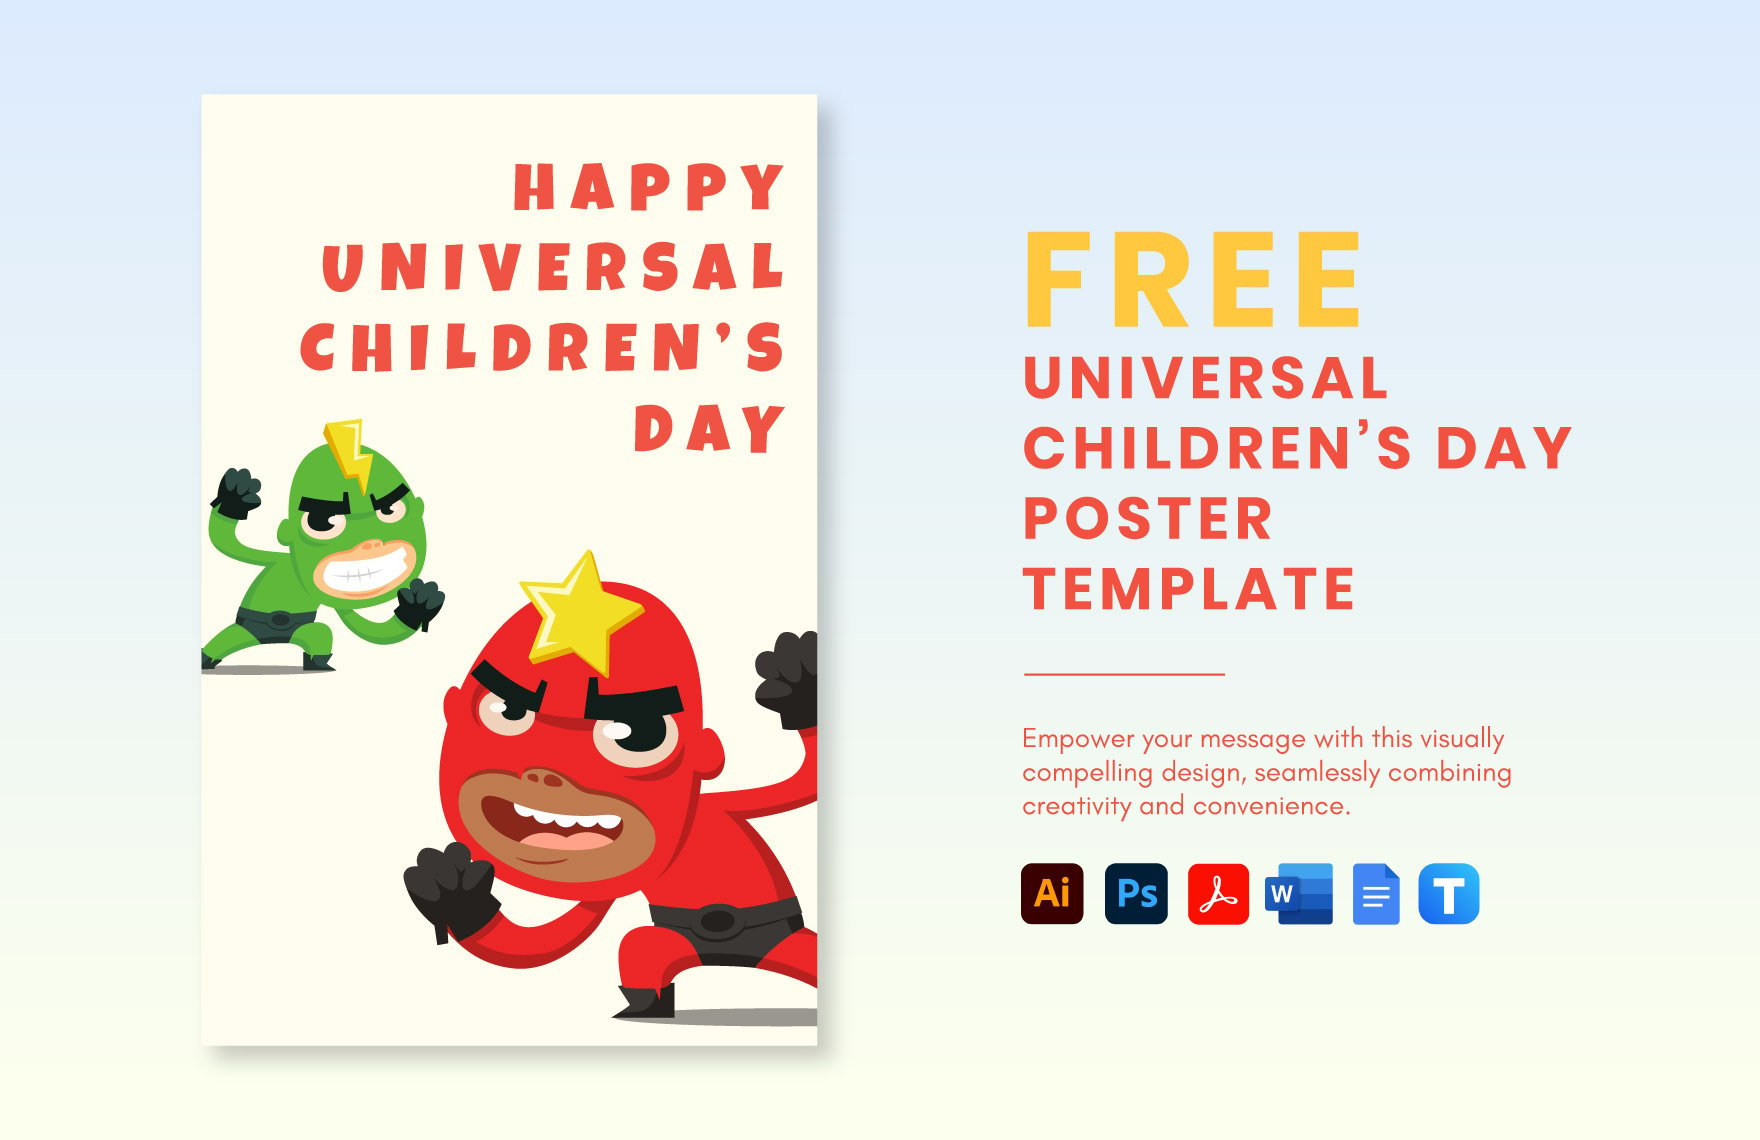 Free Universal Children’s Day Poster Template in Word, Google Docs, PDF, Illustrator, PSD